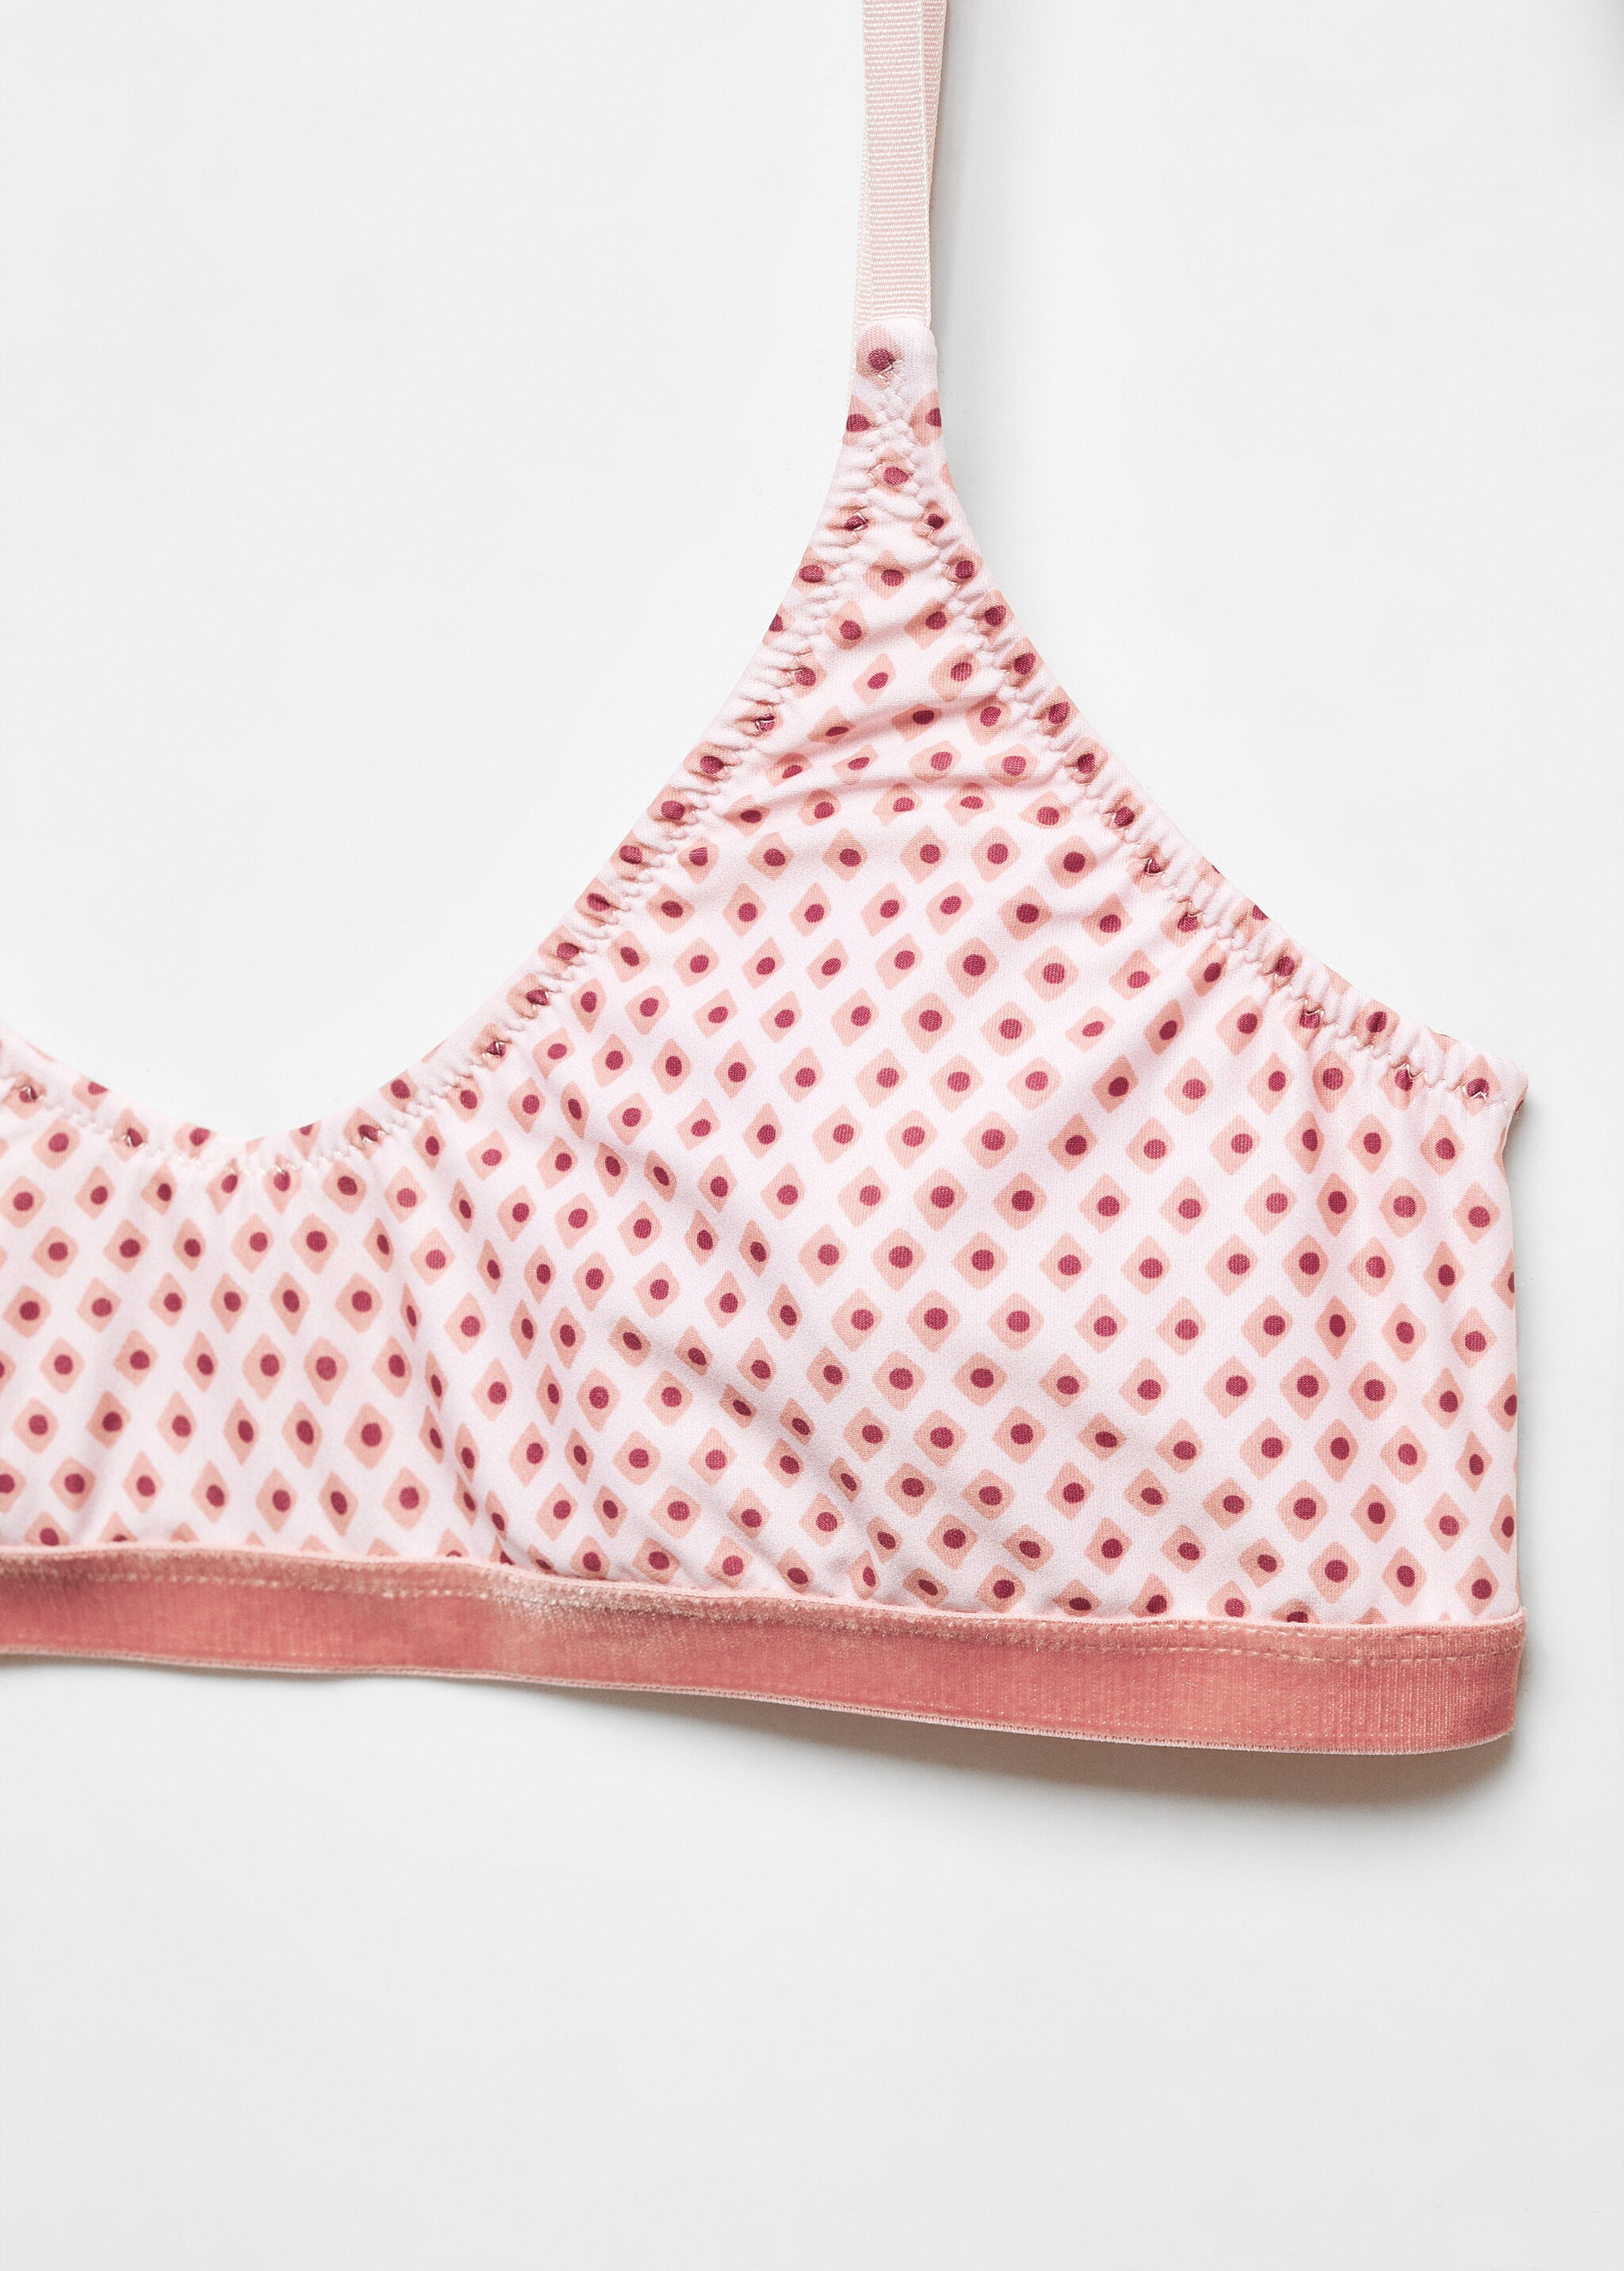 Printed bra - Details of the article 8